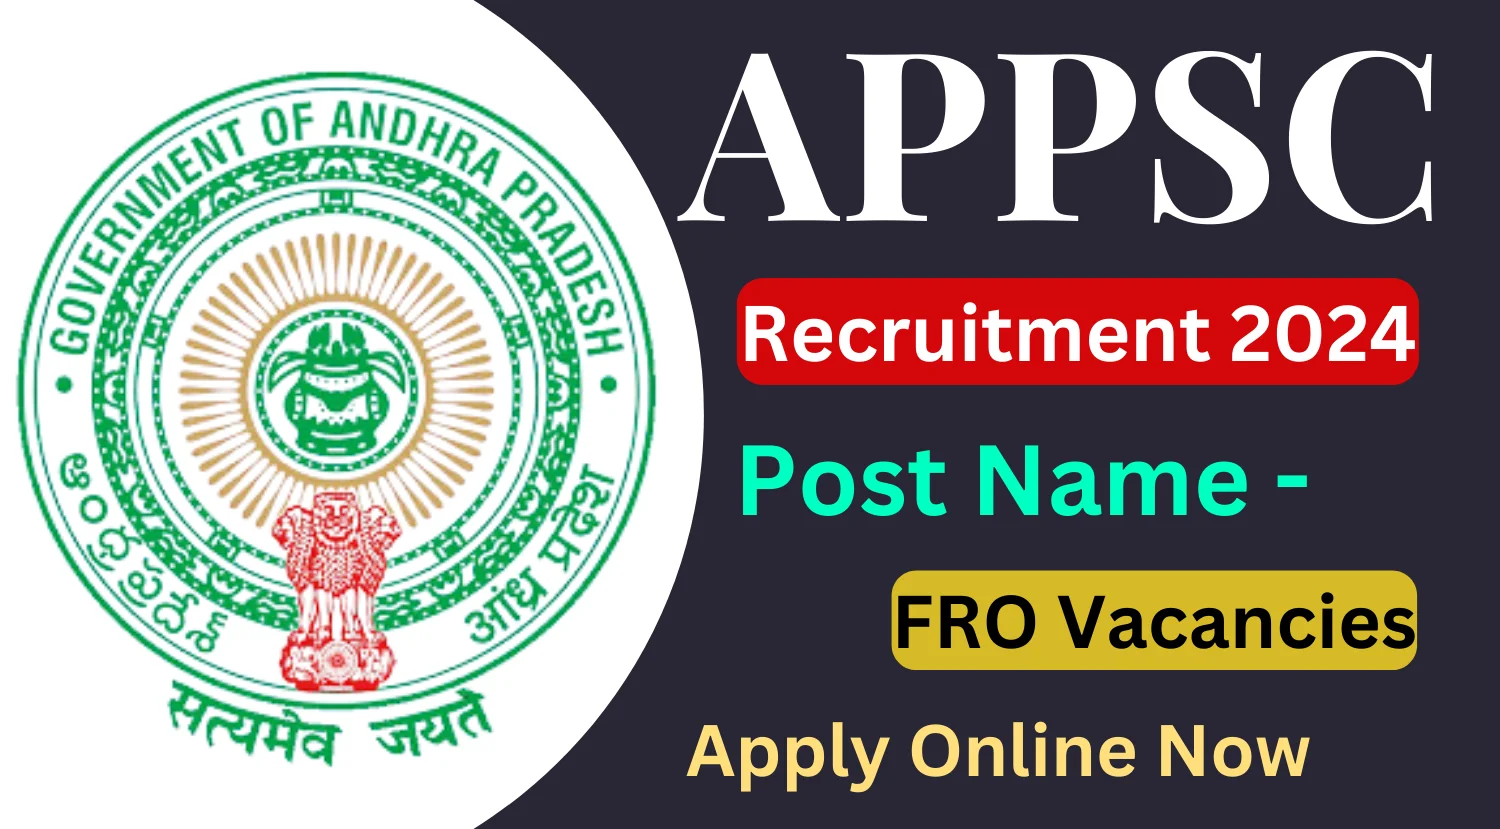 APPSC Recruitment 2024 Notification Out for FRO Vacancies